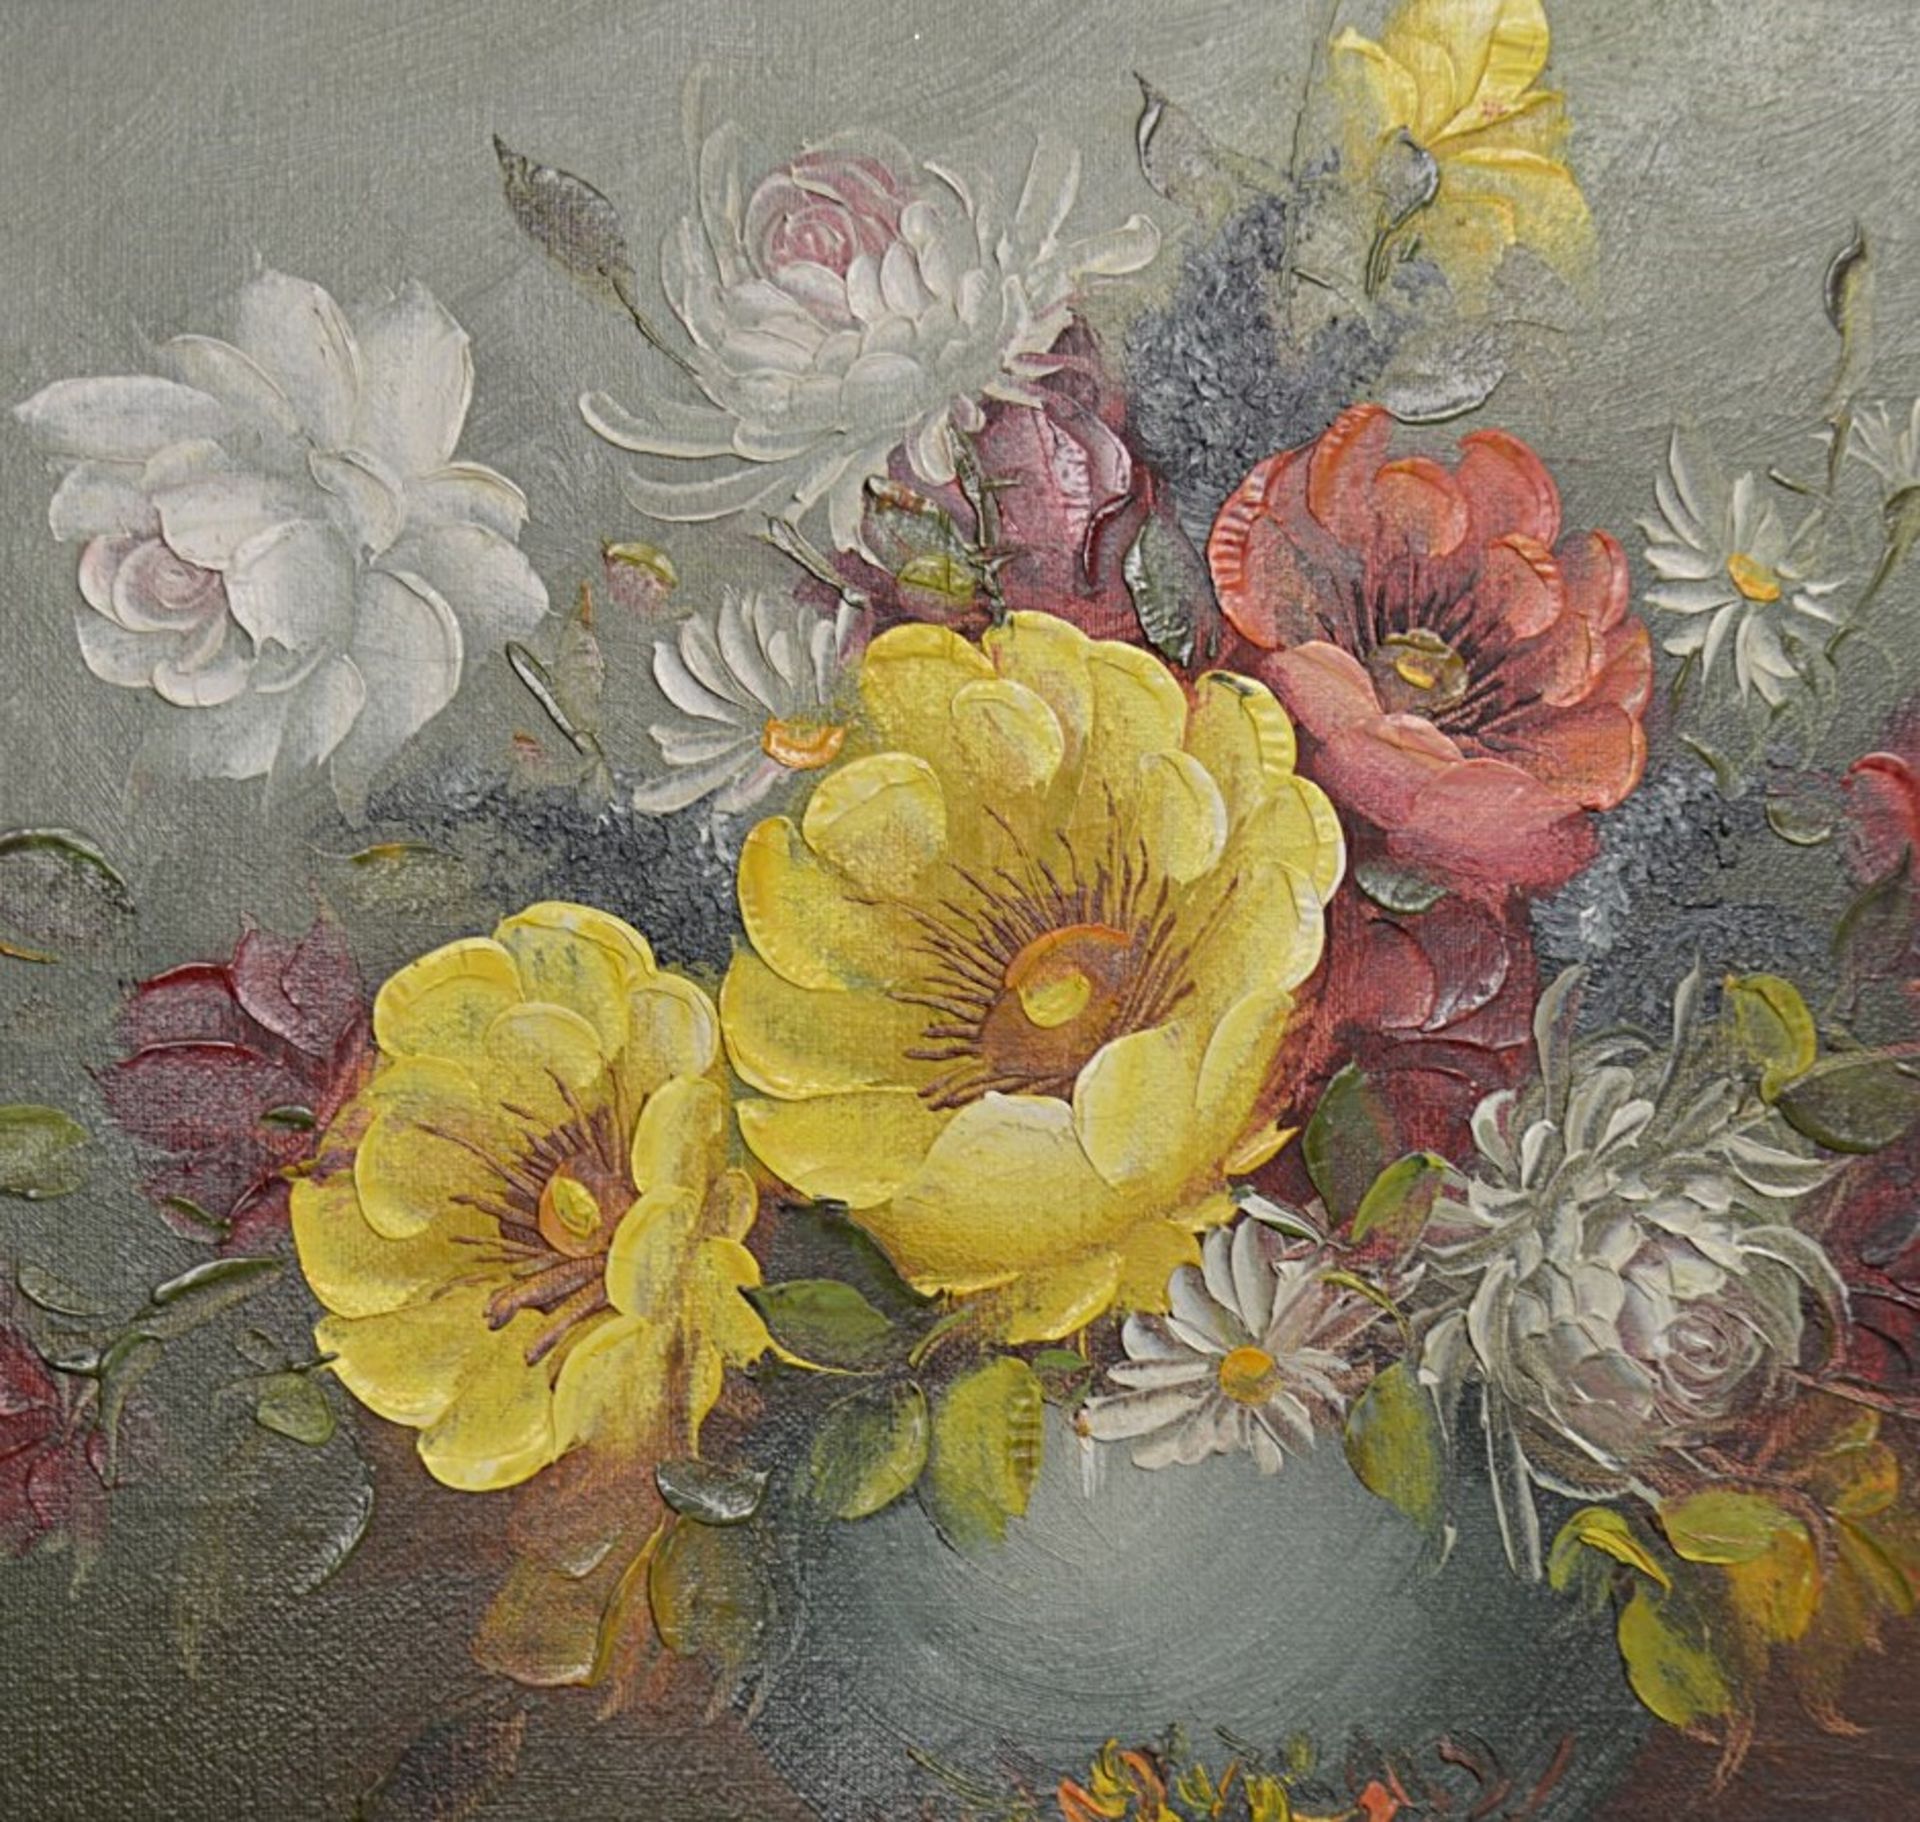 1 x Original Oil Painting Of Flowers On Canvas - Signed By The Artist - Dimensions: 36 x 46cm - Ref: - Image 6 of 6